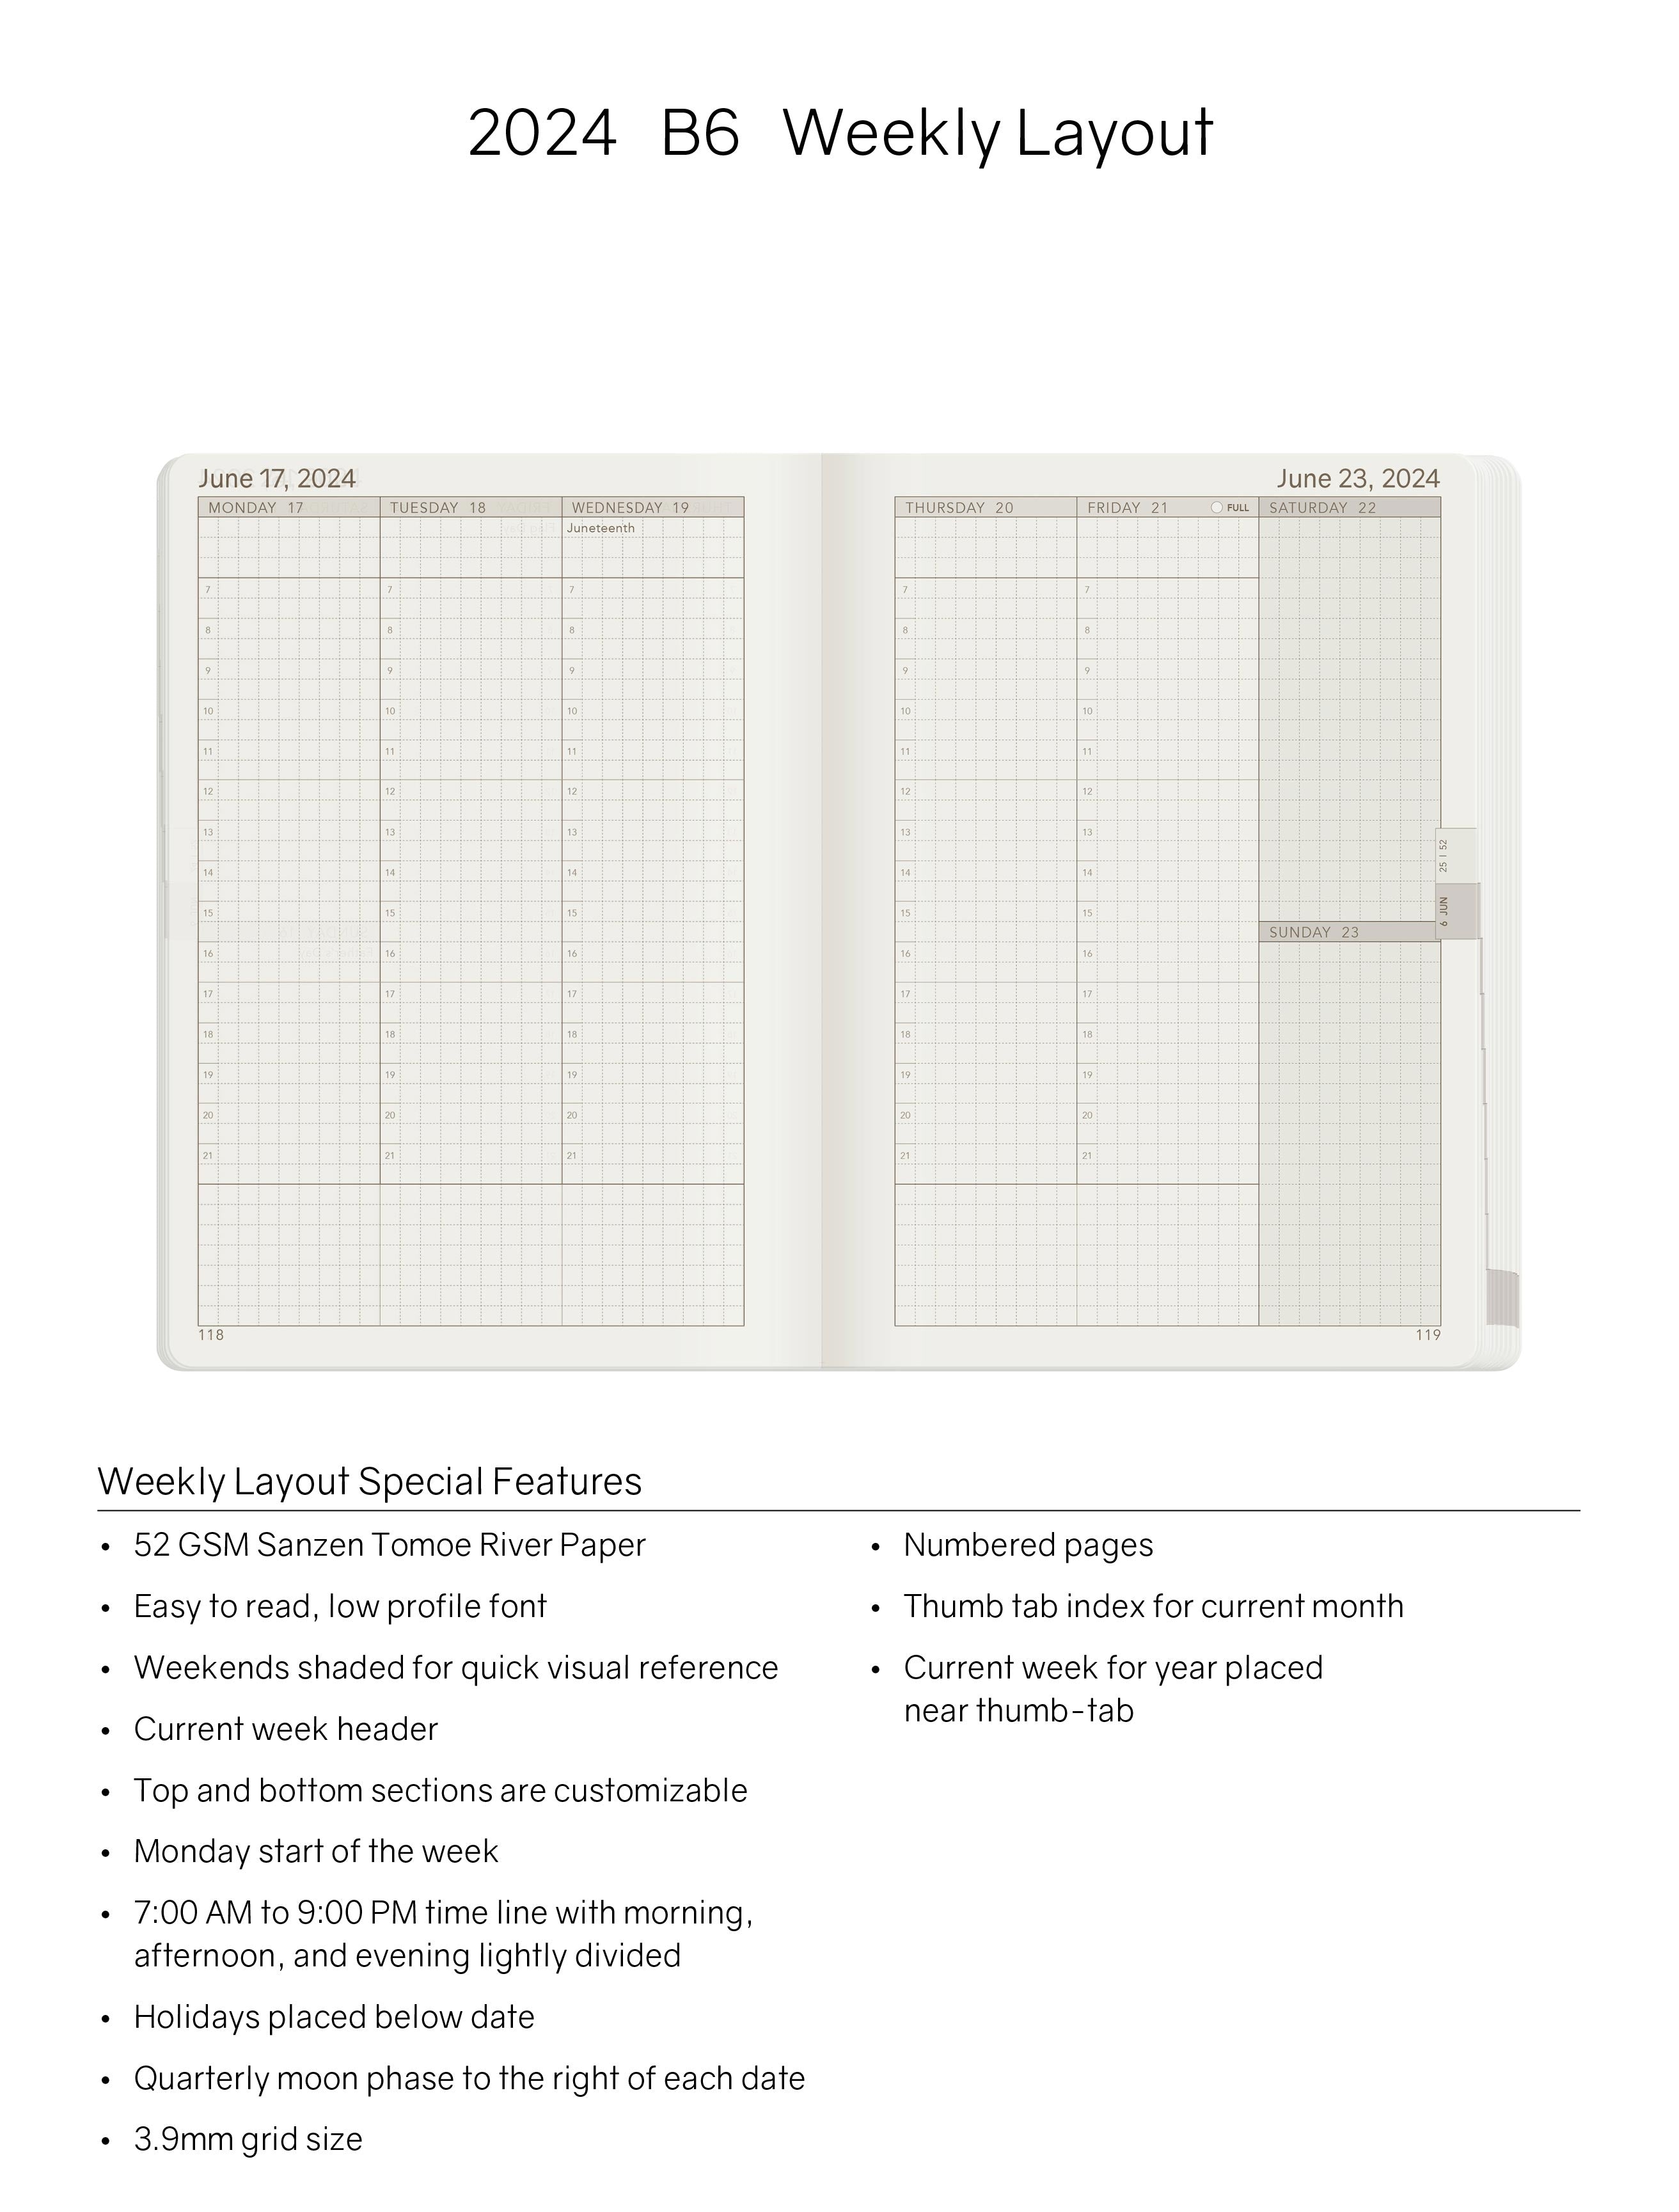 2024 B6 Weekly Planner -Alpine Lake (Blue) - 52gsm Tomoe River Paper (All in One)